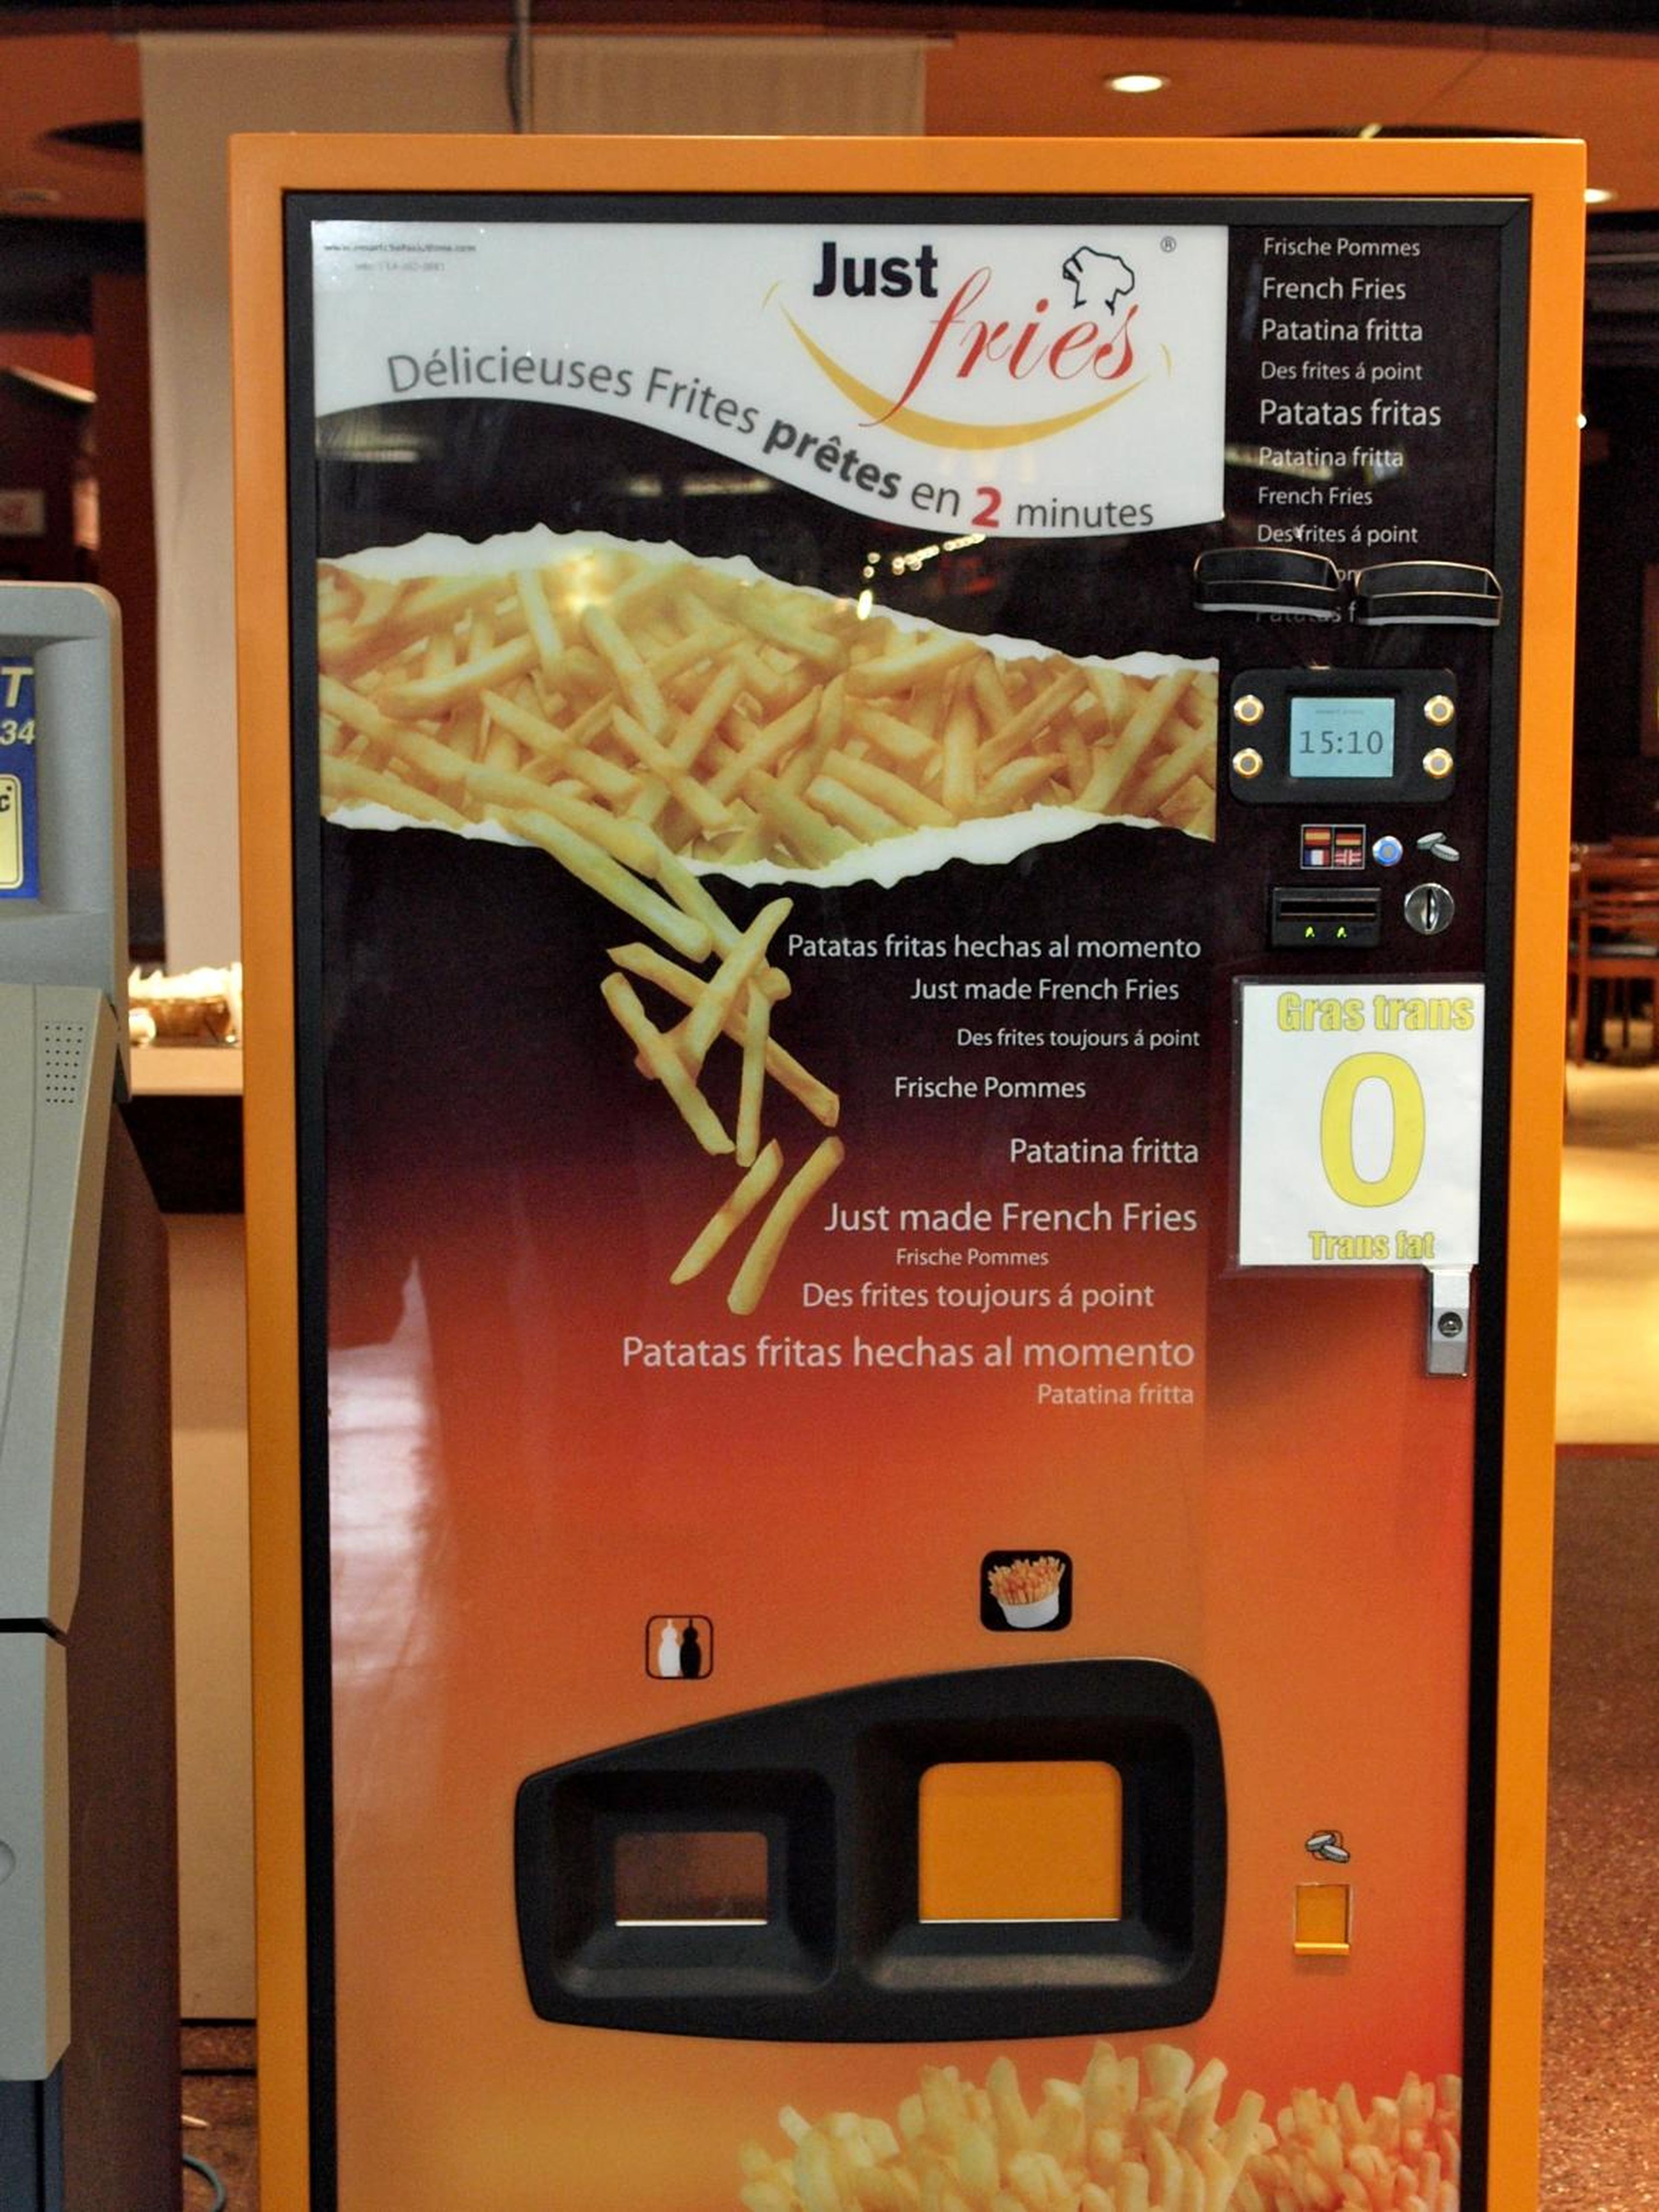 There are a lot of variations of the French fry vending machine.